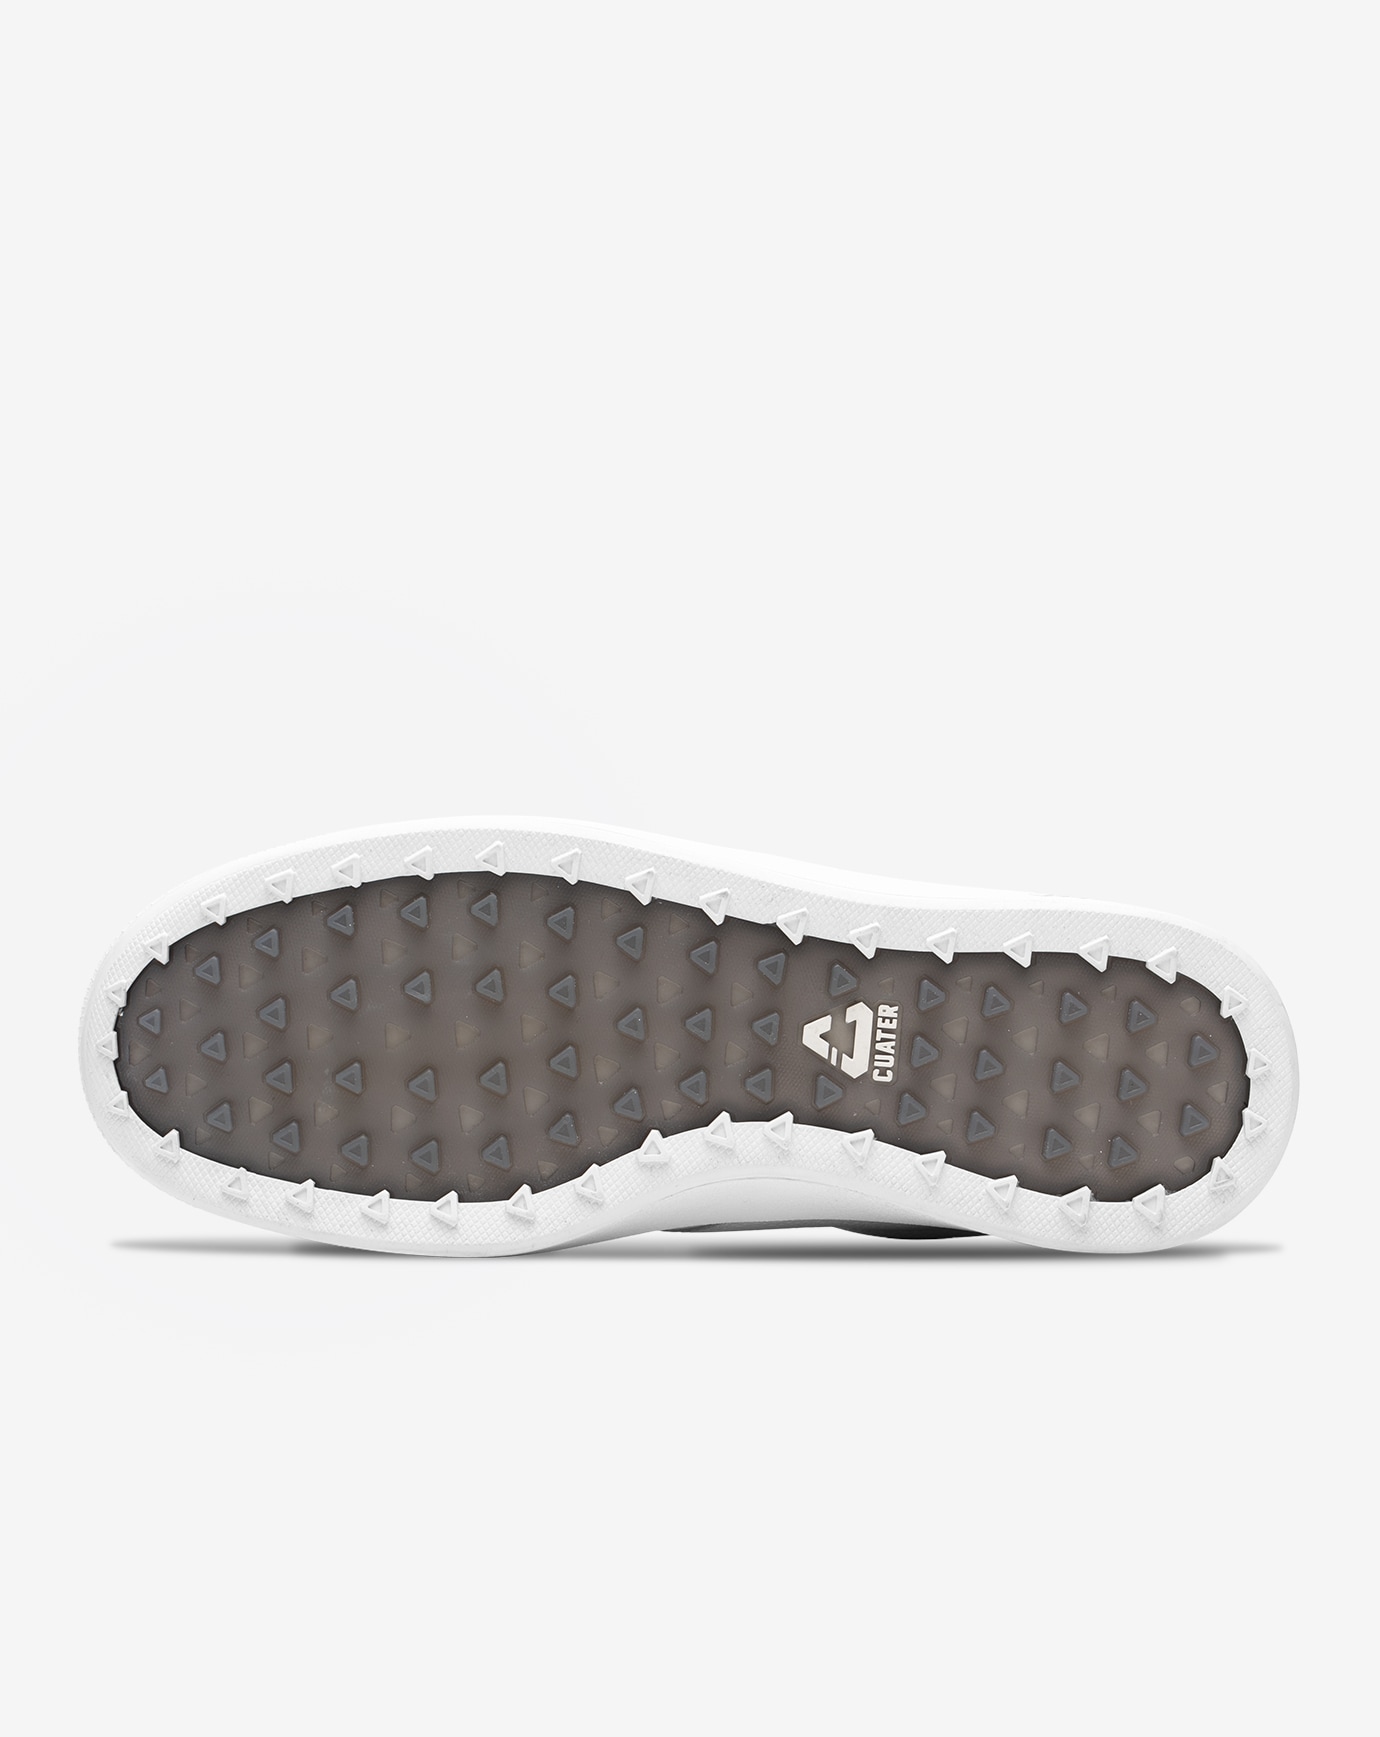 THE WILDCARD LEATHER SPIKELESS GOLF SHOE Image 2